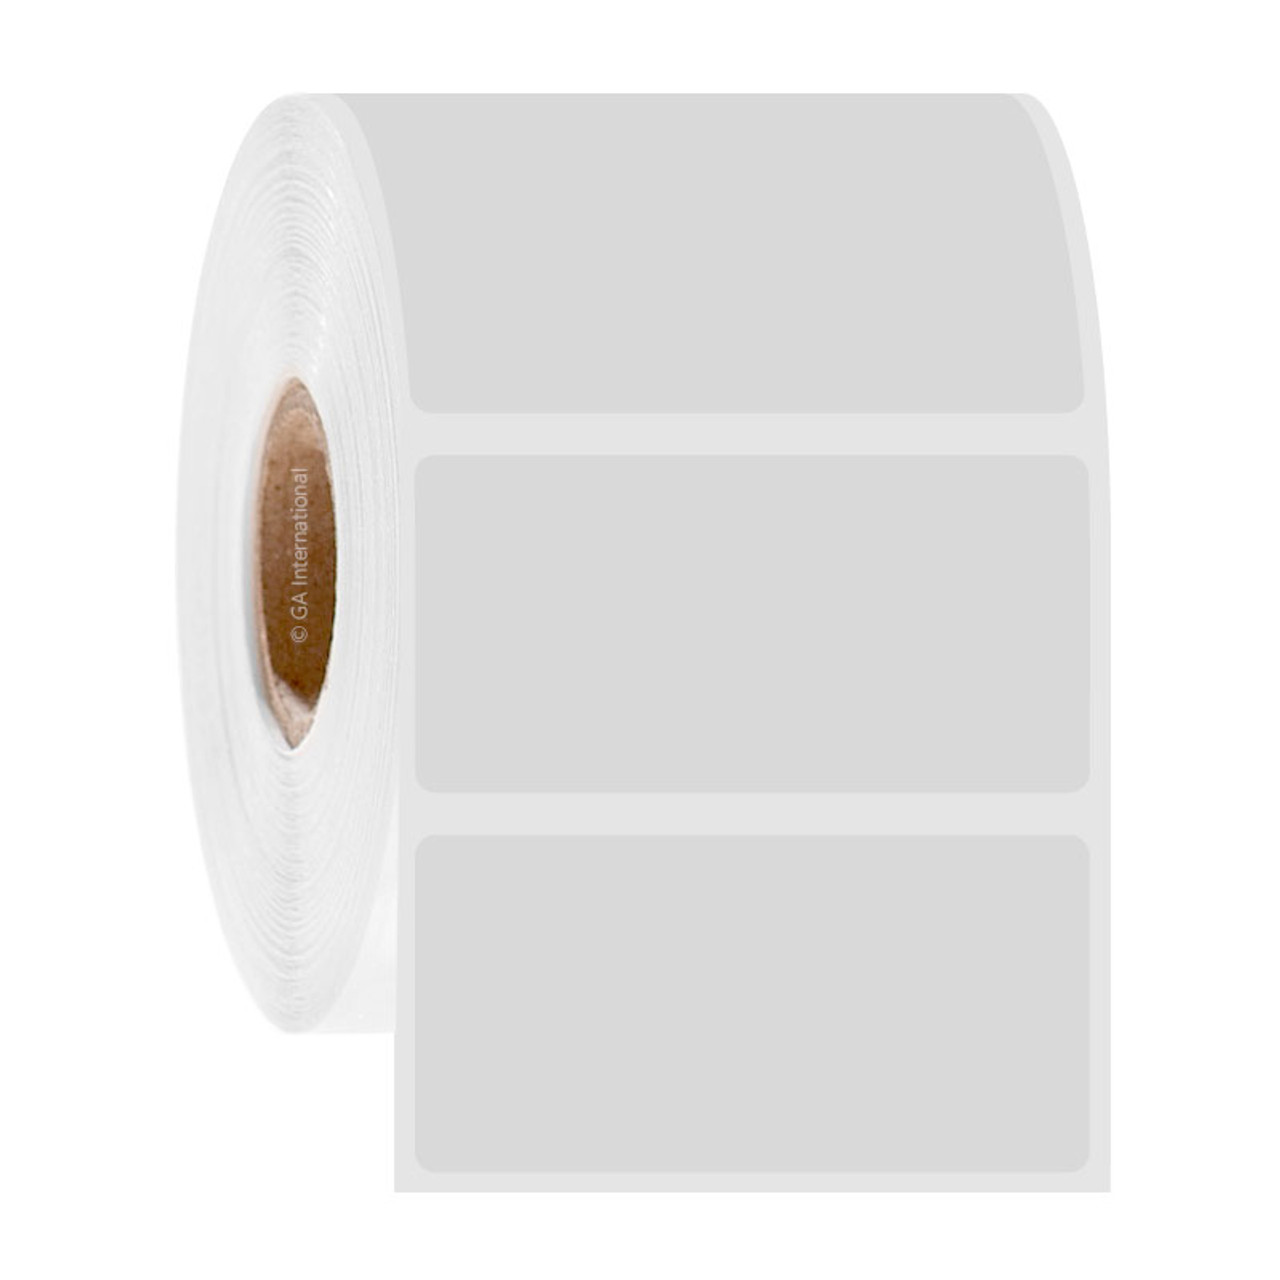 Permanent Steri-ThermoTAG - Autoclave-Resistant Thermal-Transfer Labels, White, 2" x 1", 2000 labels/roll